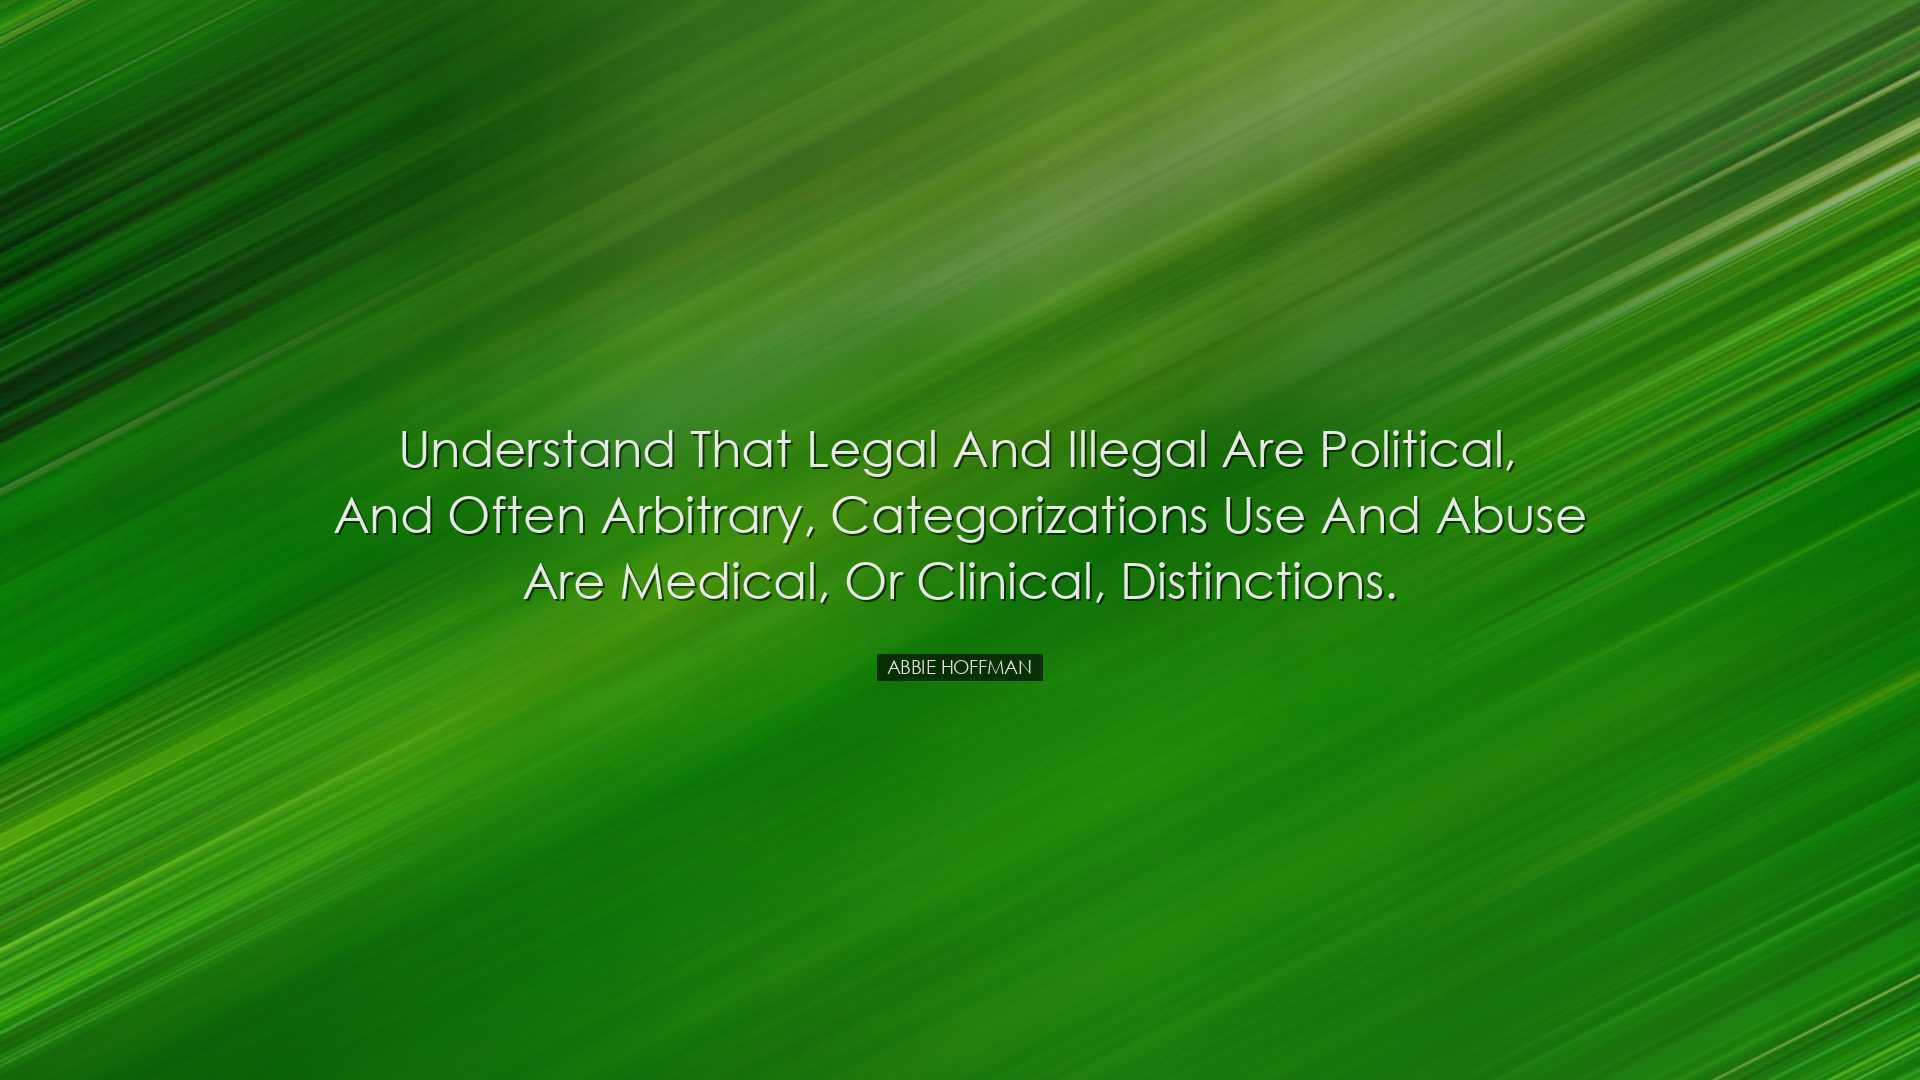 Understand that legal and illegal are political, and often arbitra